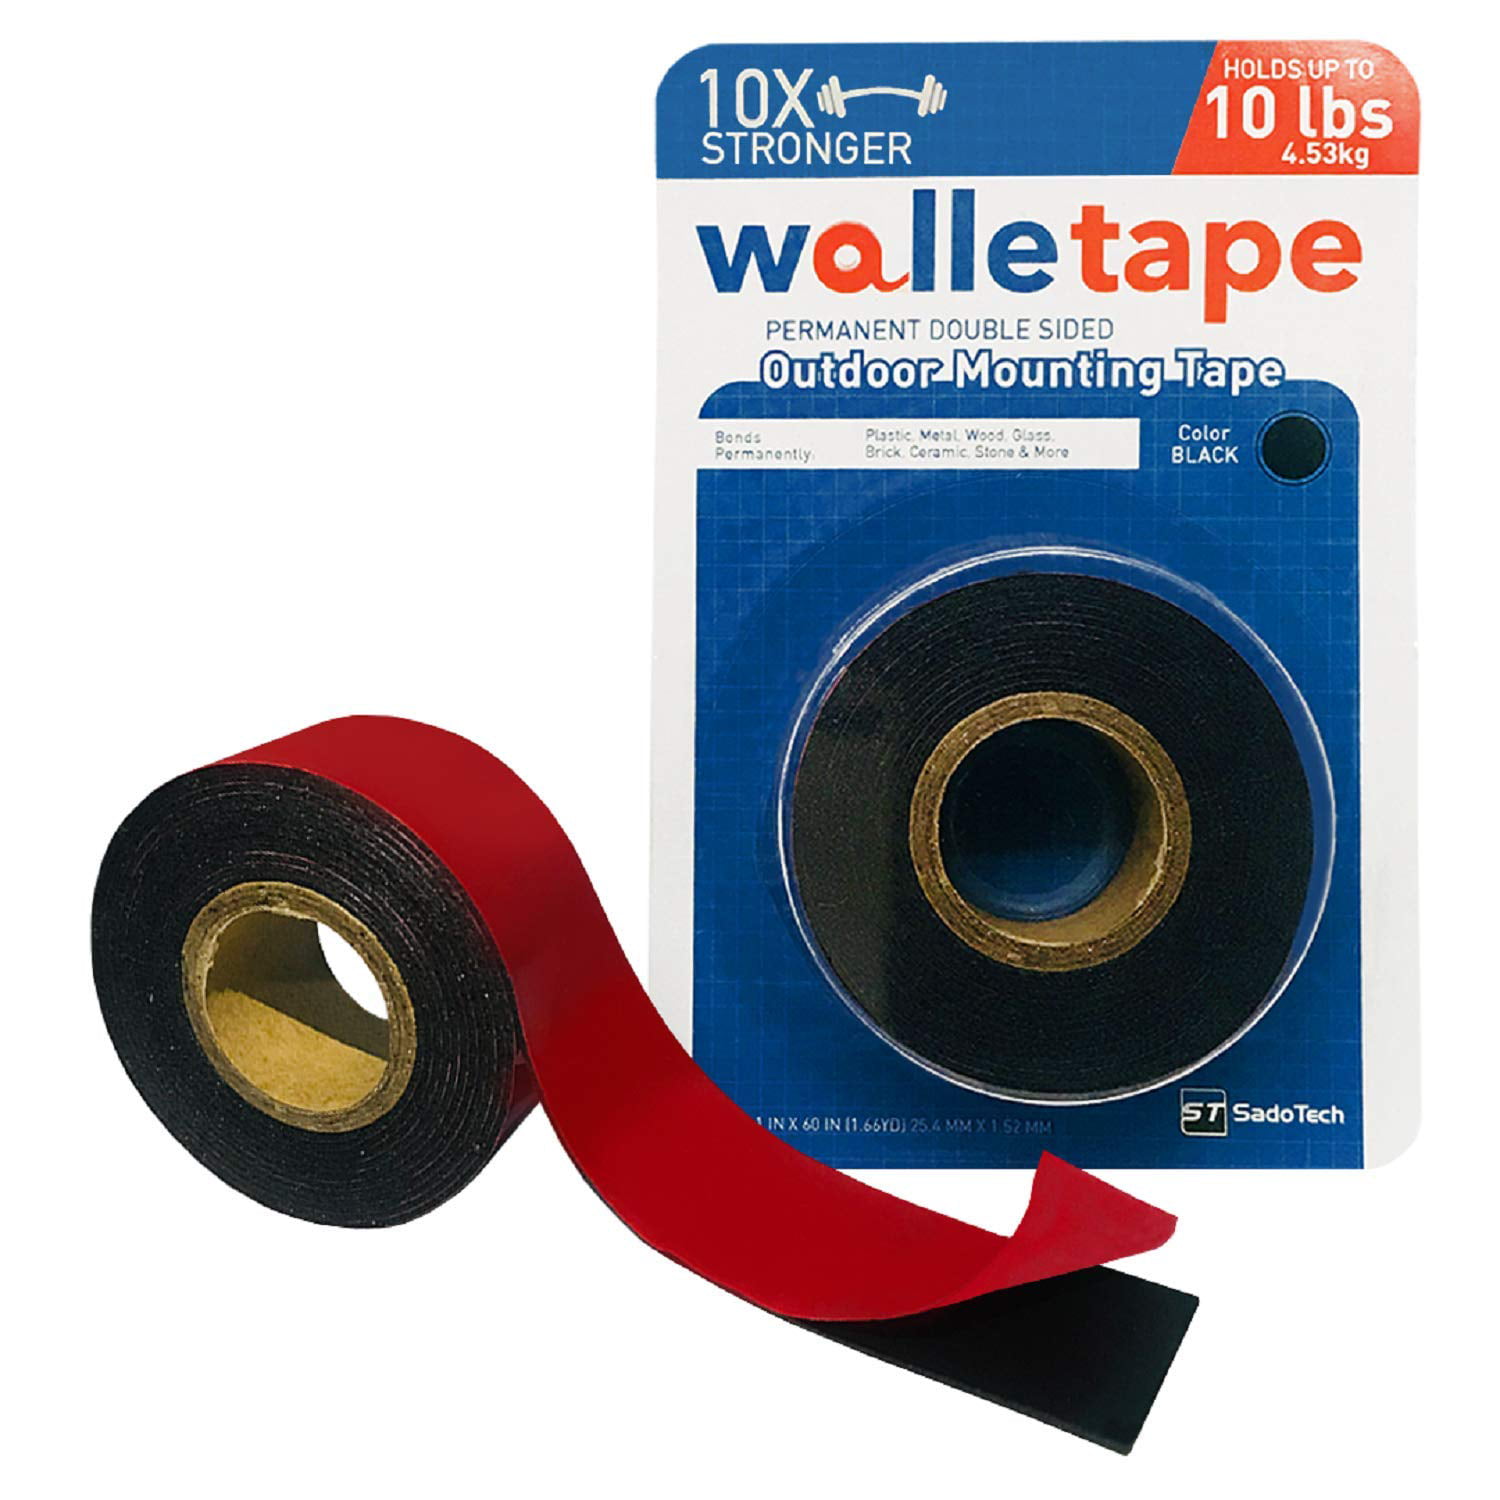 scotch double sided tape for walls